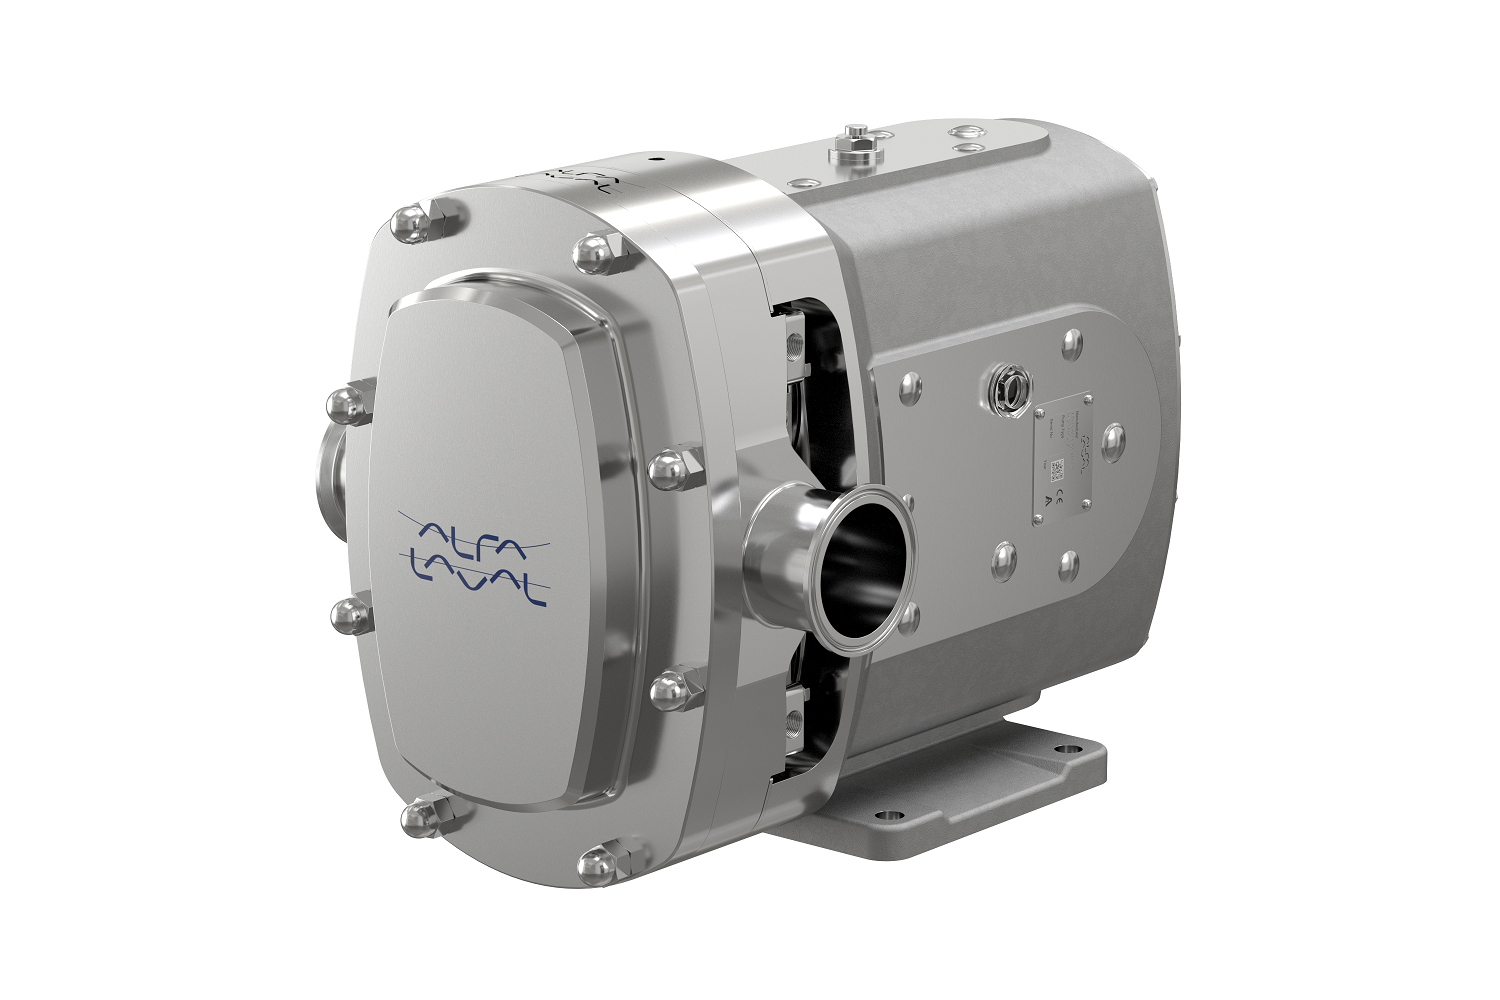 Alfa Laval's DuraCirc circumferential piston pump combines efficiency, hygienic assurance with EHEDG and 3-A certification as standard.